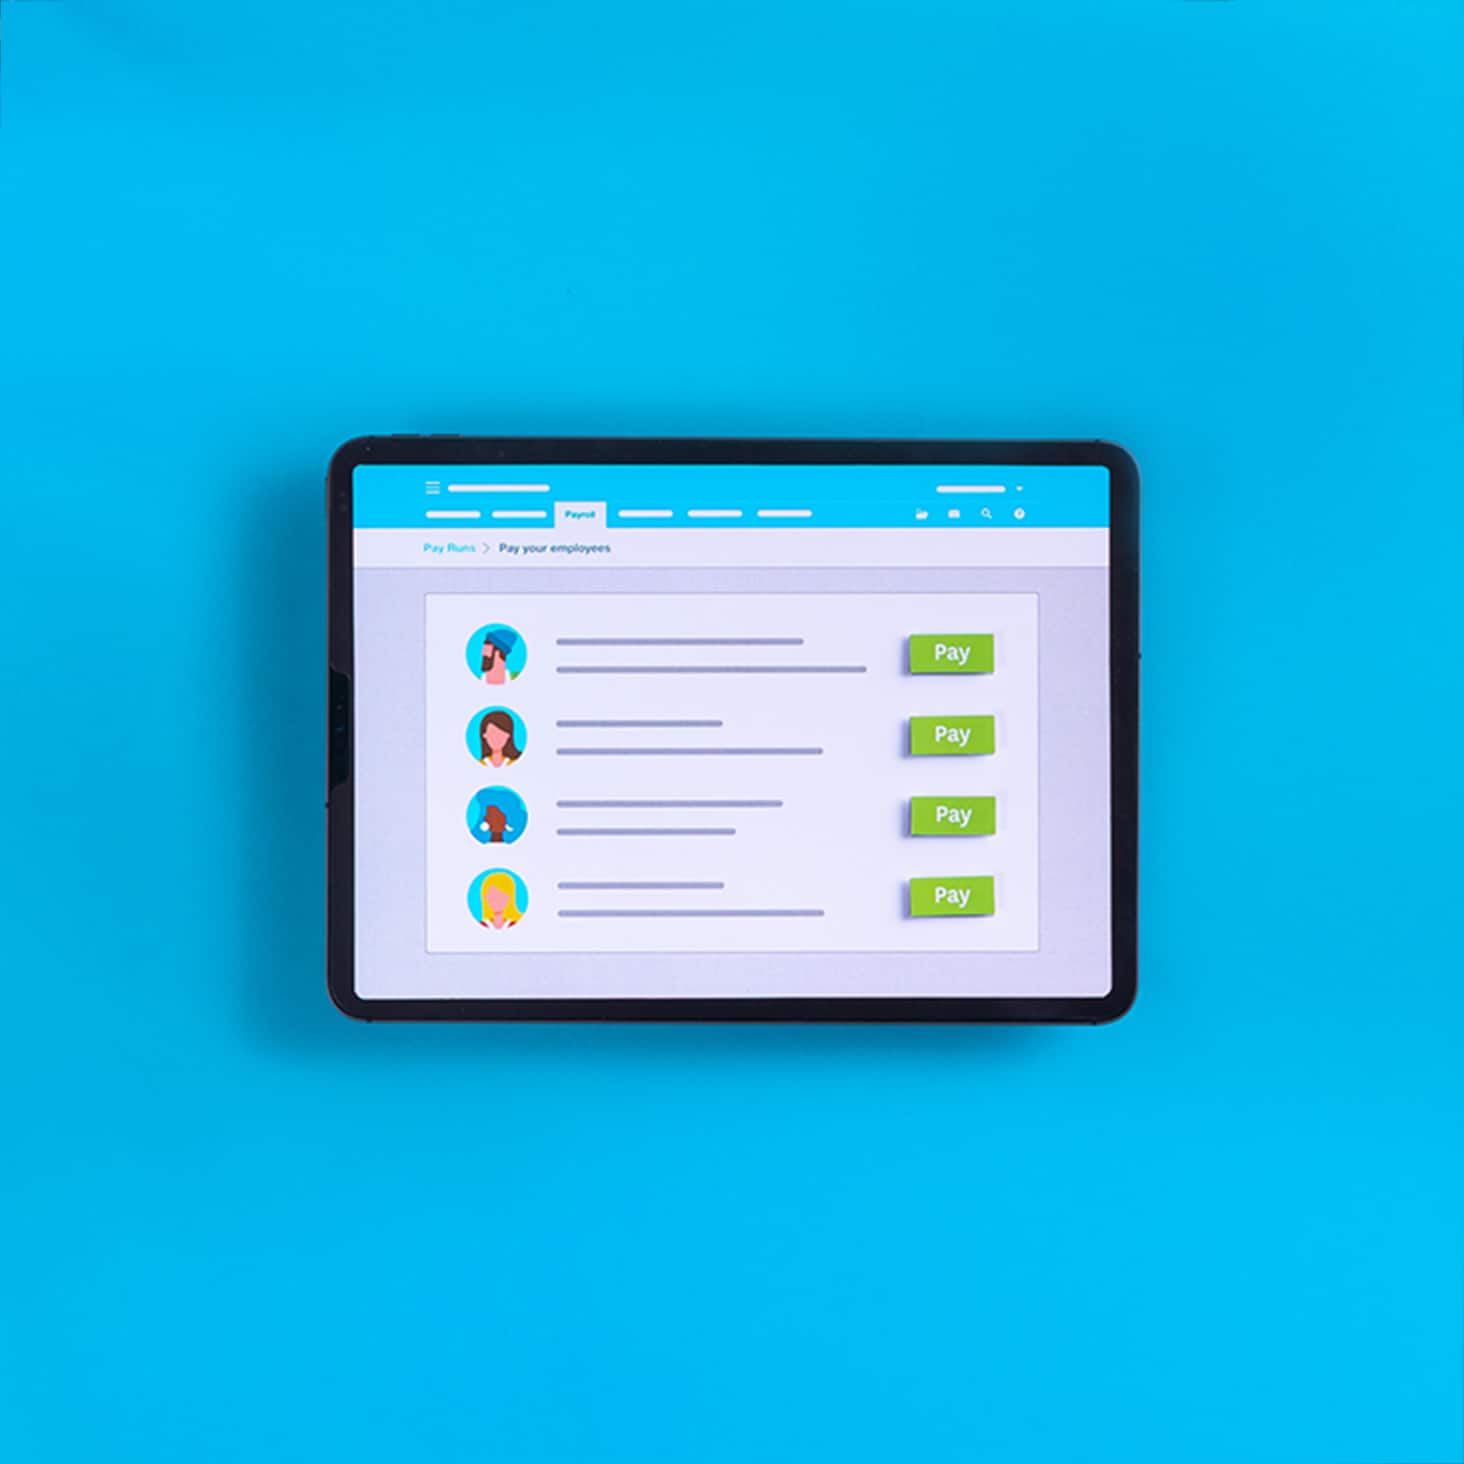 Xero cloud payroll displays a list of employees that can be selected for payment in this pay run.